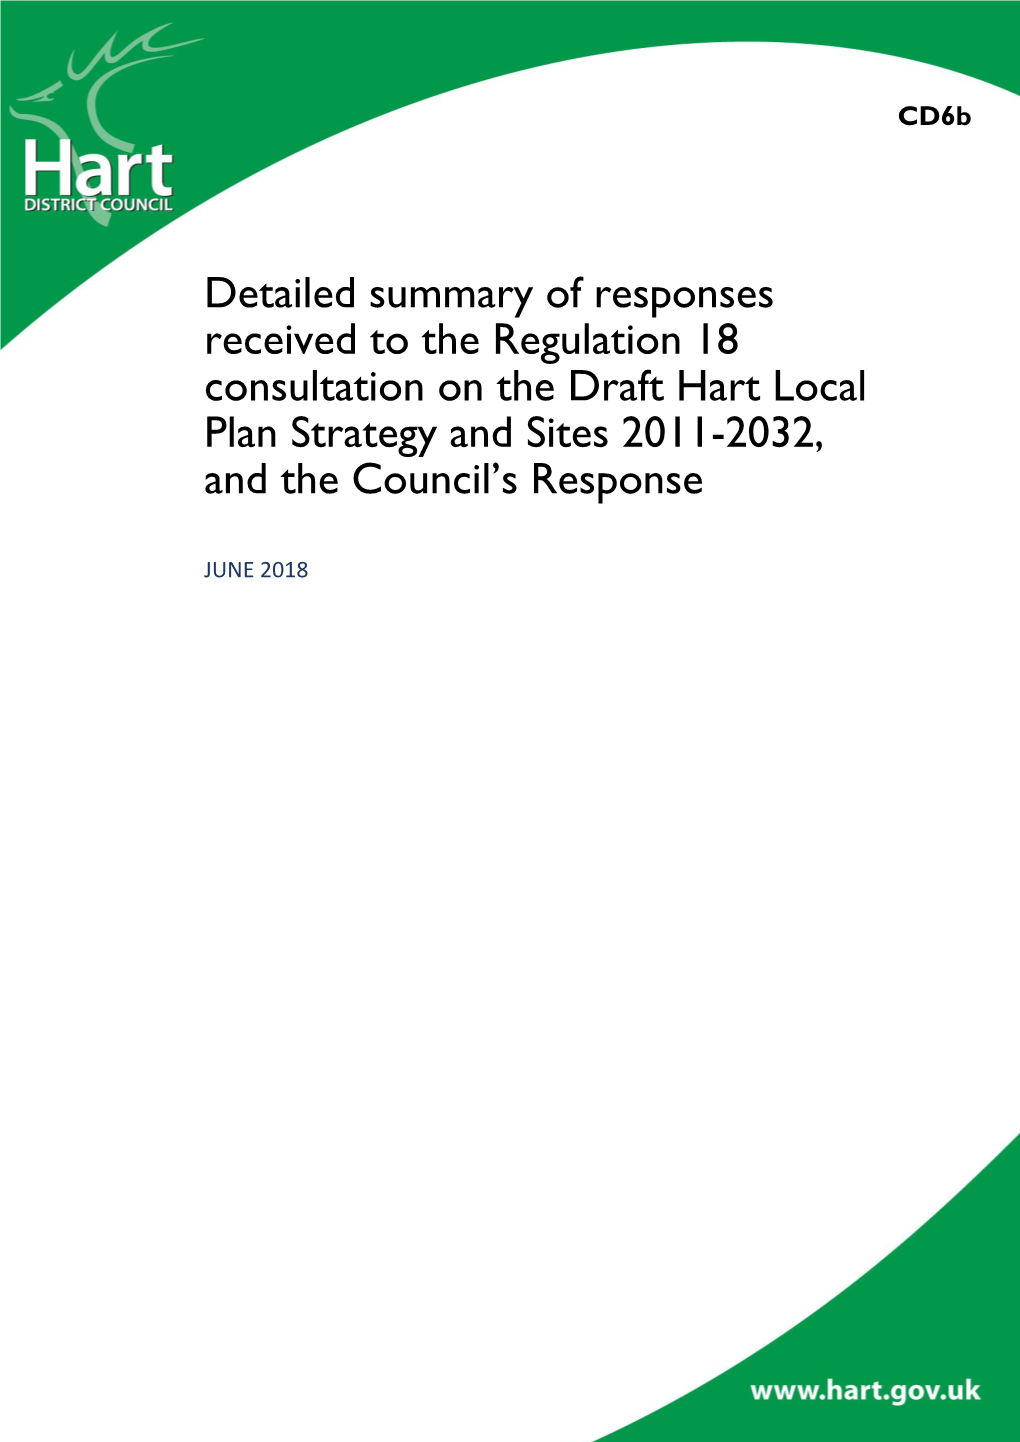 Detailed Summary of Responses Received to the Regulation 18 Consultation on the Draft Hart Local Plan Strategy and Sites 2011-2032, and the Council’S Response